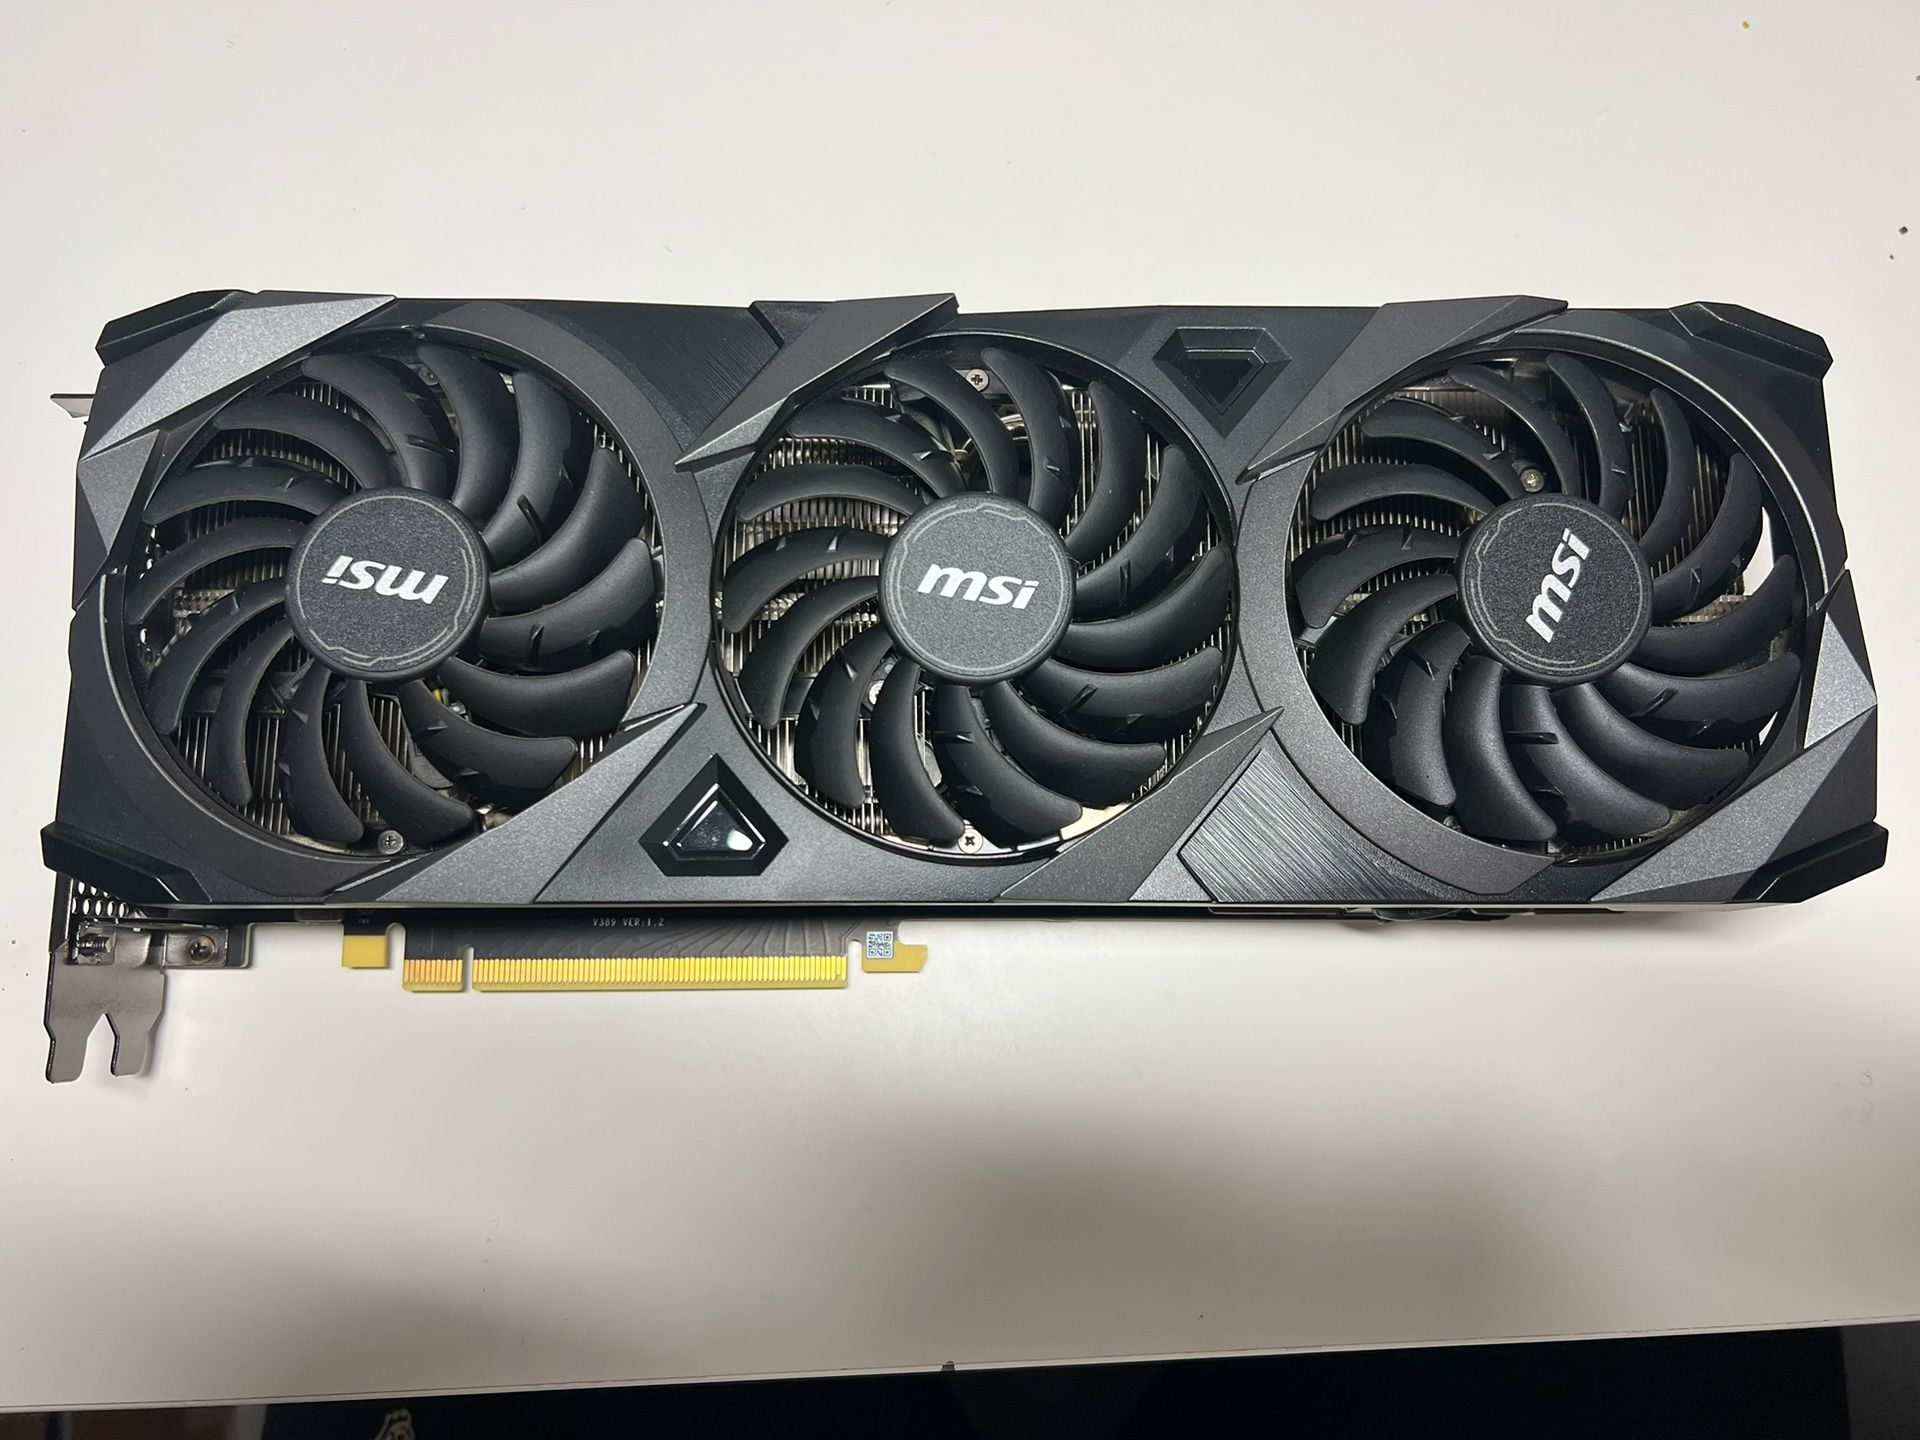 MSI RTX 3080 10GB (-$20 If Picked Up)